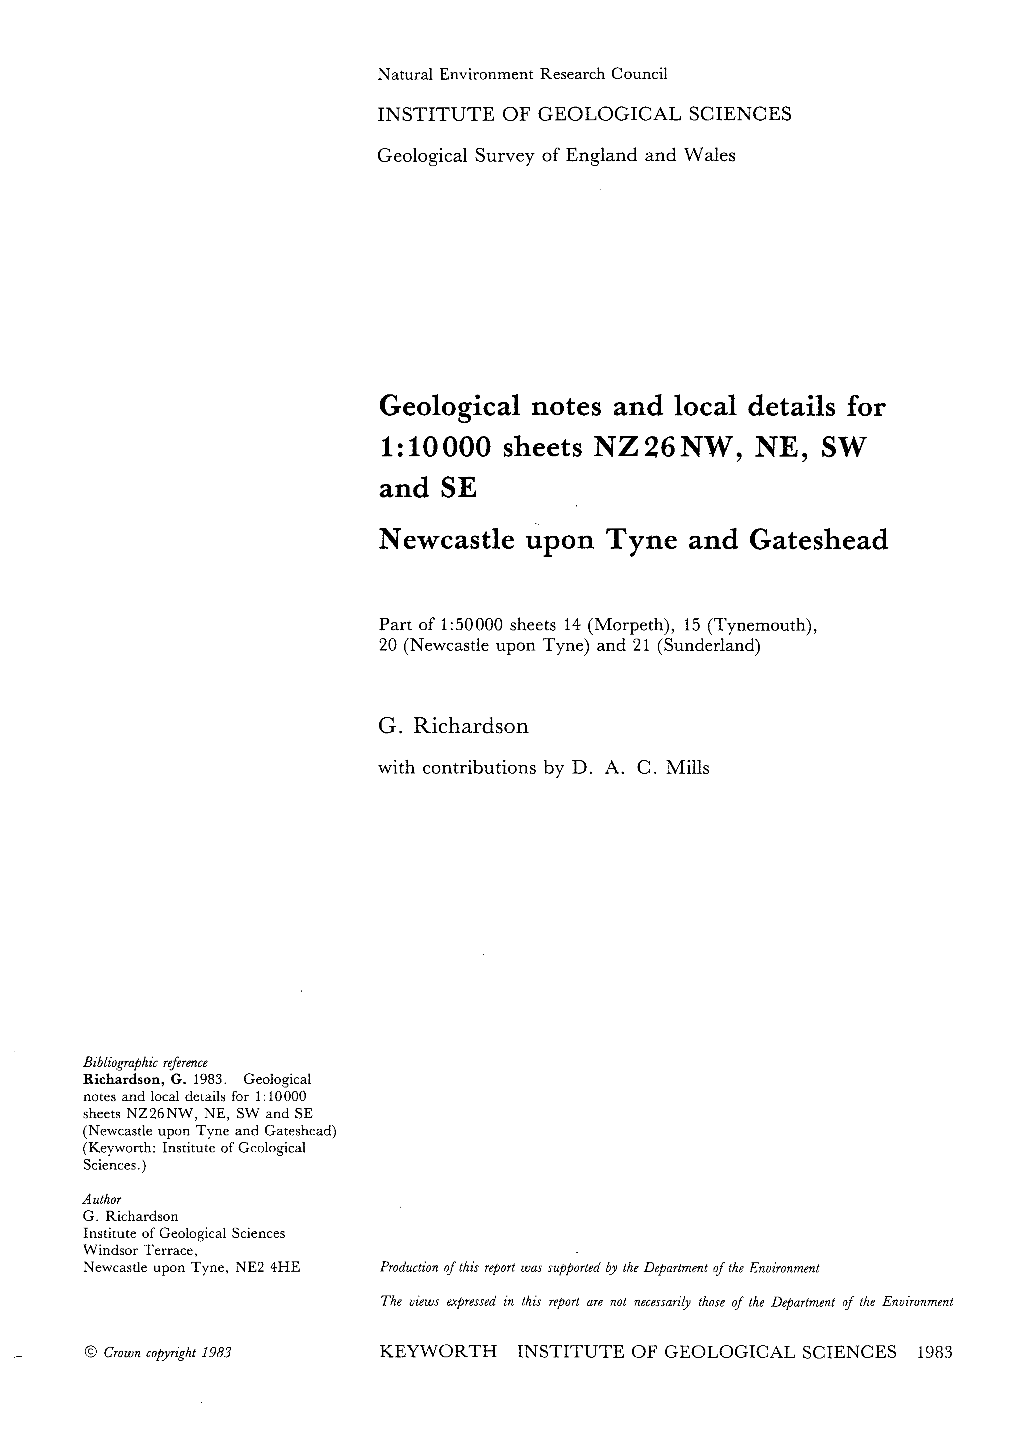 Geological Notes and Local Details for 1:Loooo Sheets NZ26NW, NE, SW and SE Newcastle Upon Tyne and Gateshead